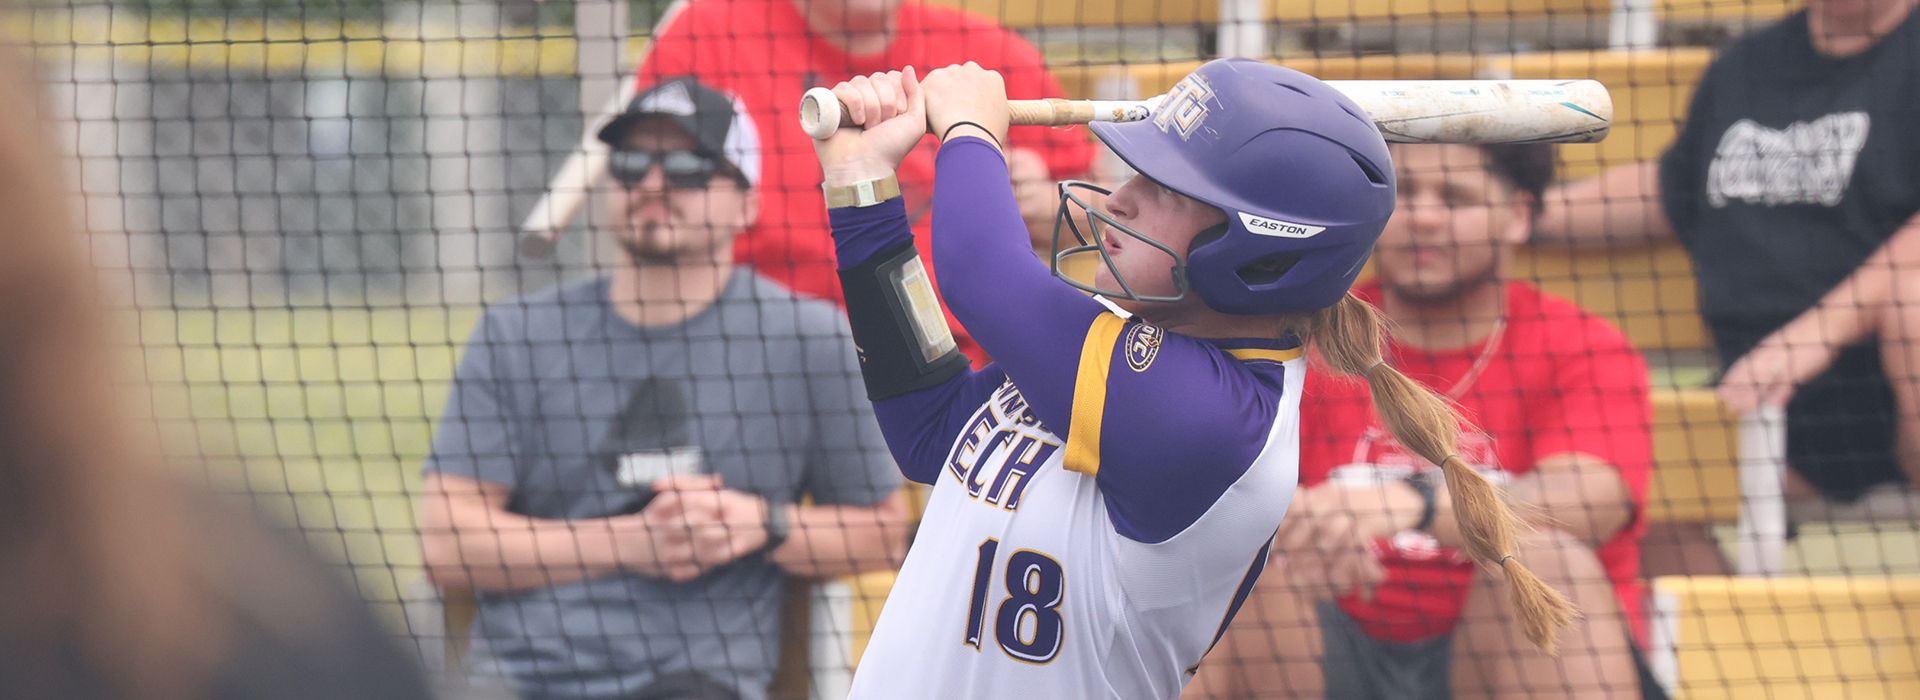 Golden Eagles lock up tourney spot with doubleheader sweep over SIUE